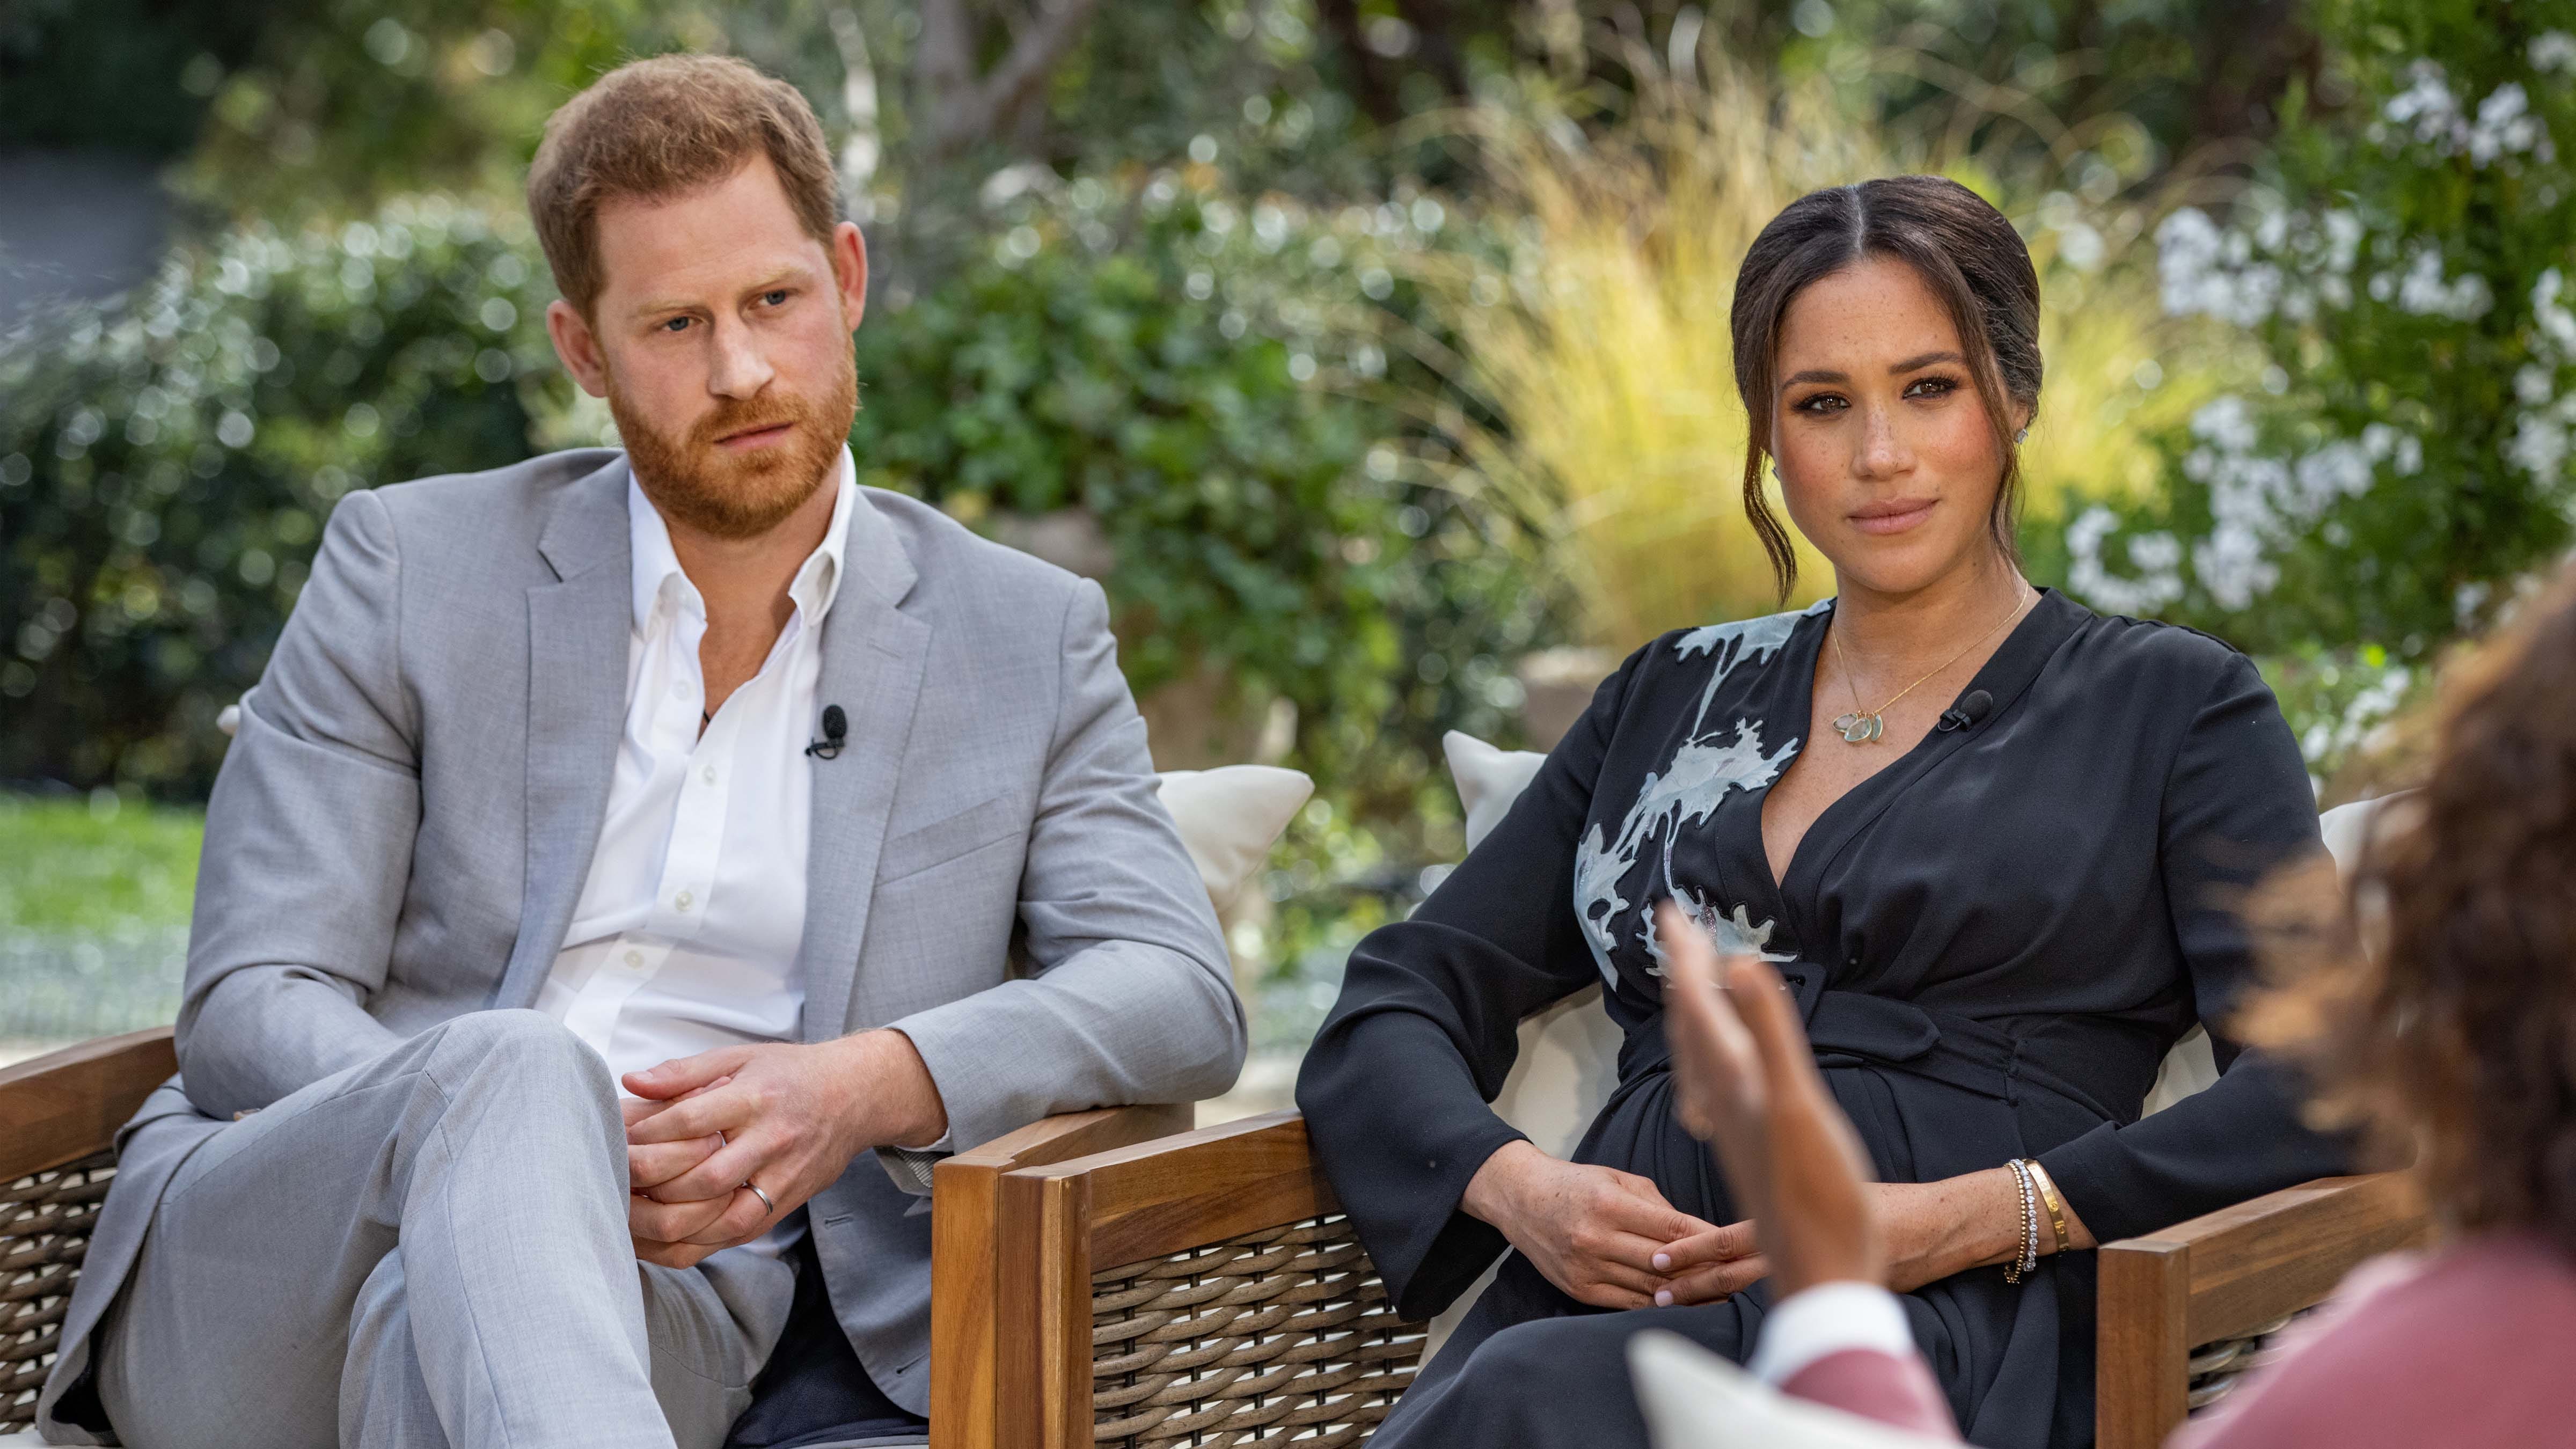 Meghan Markle Oprah interview dress is Dress of the Year | Exhibition